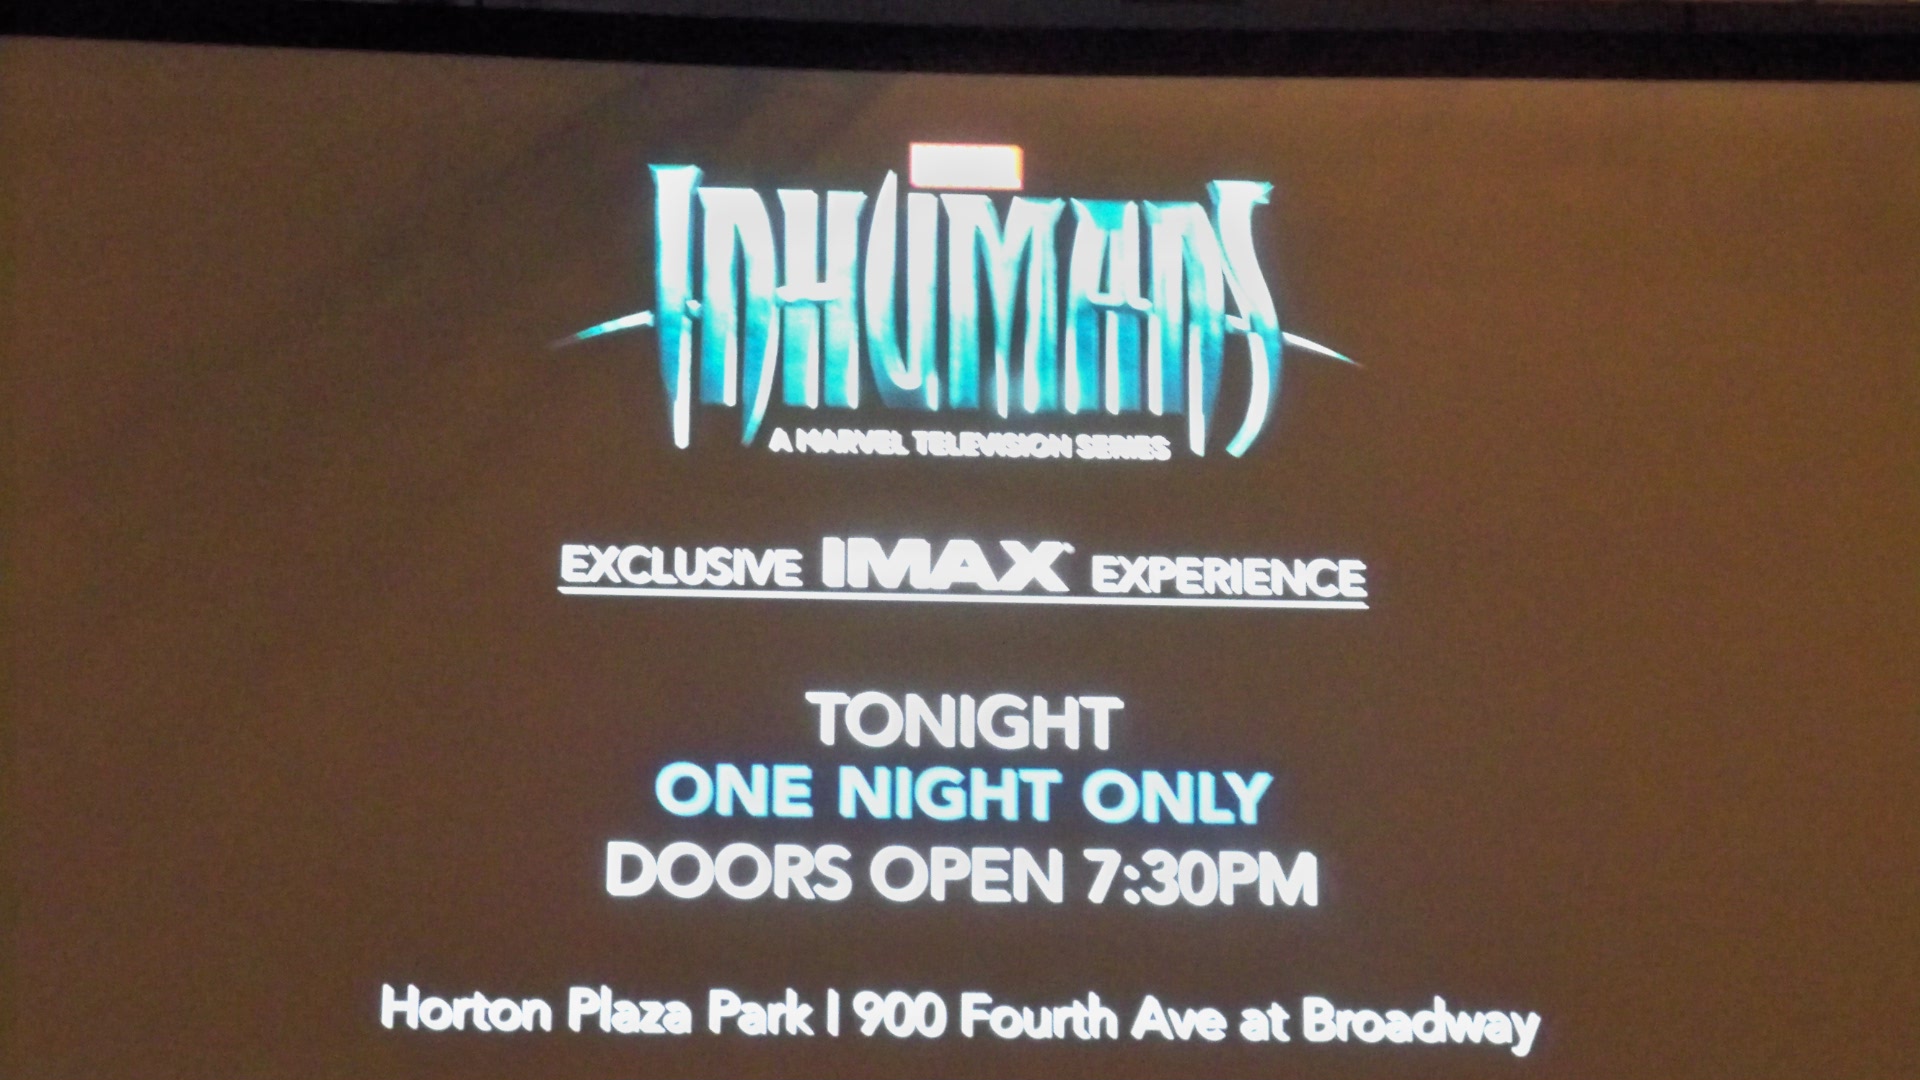 sdcc 2017:  Marvel Provides Preview of Inhumans on IMAX